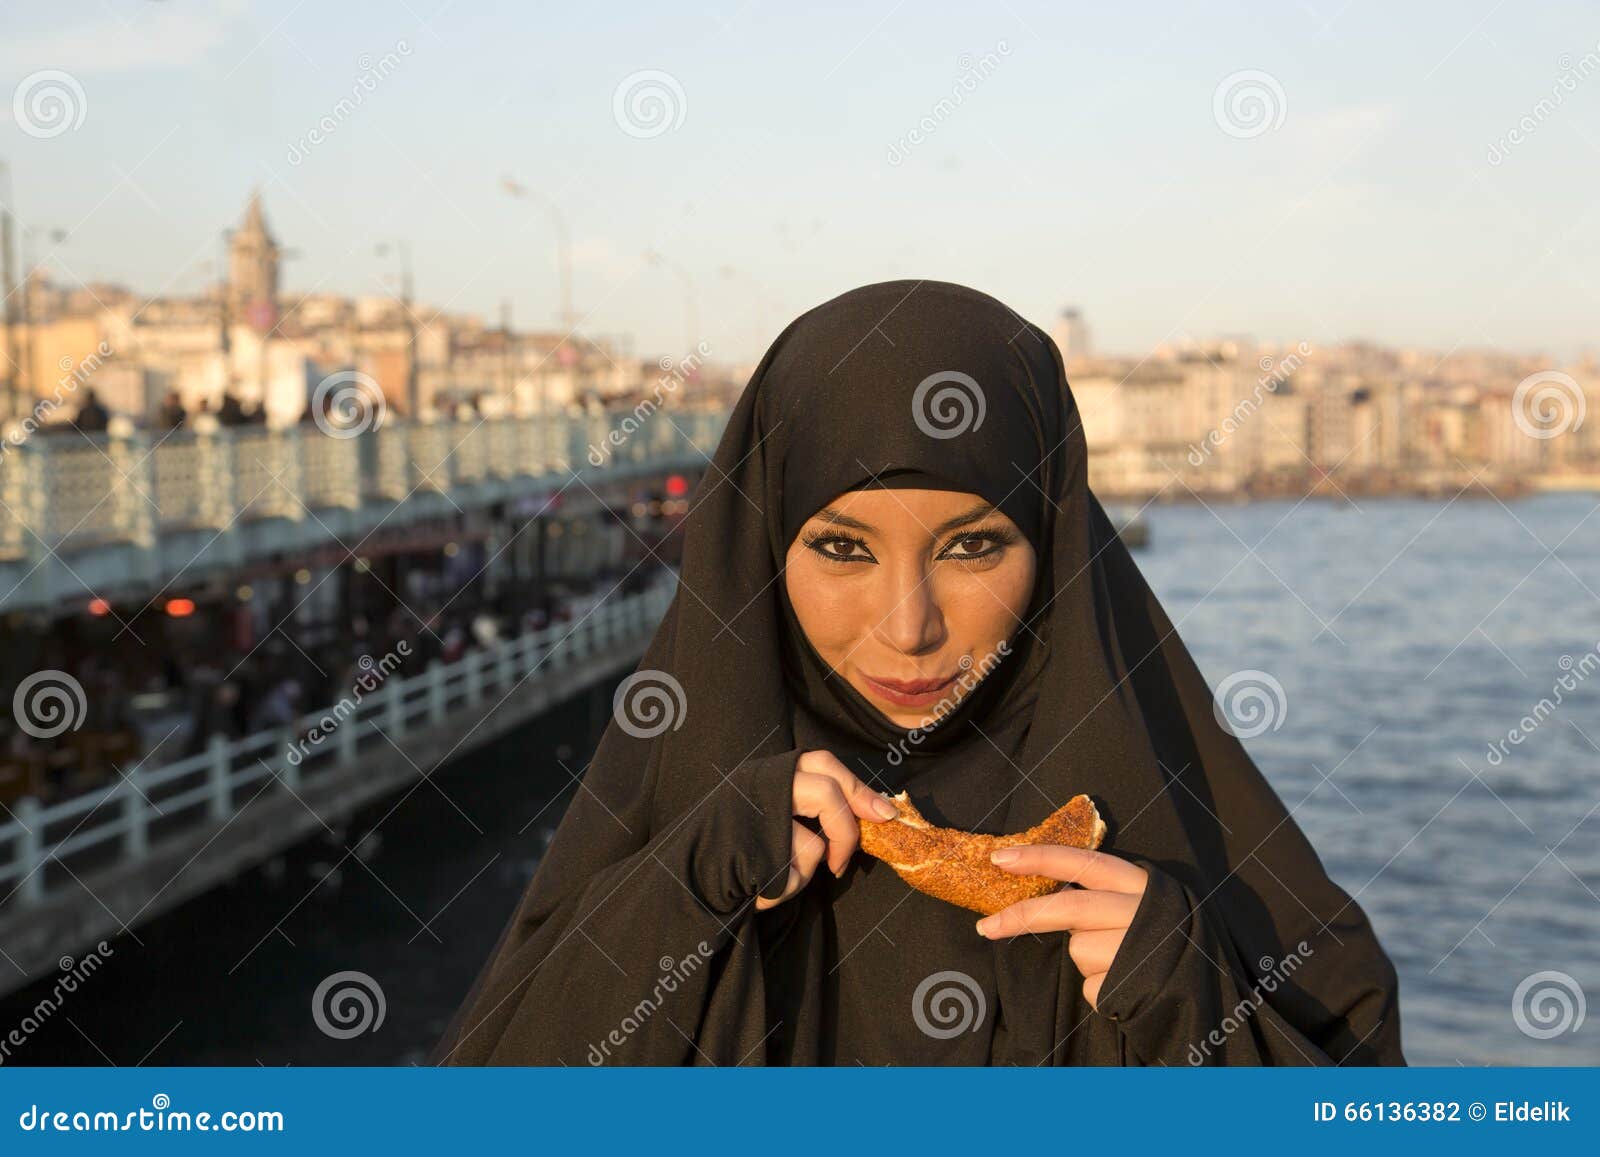 Woman Dressed With Black Headscarf Chador On Istanbul 